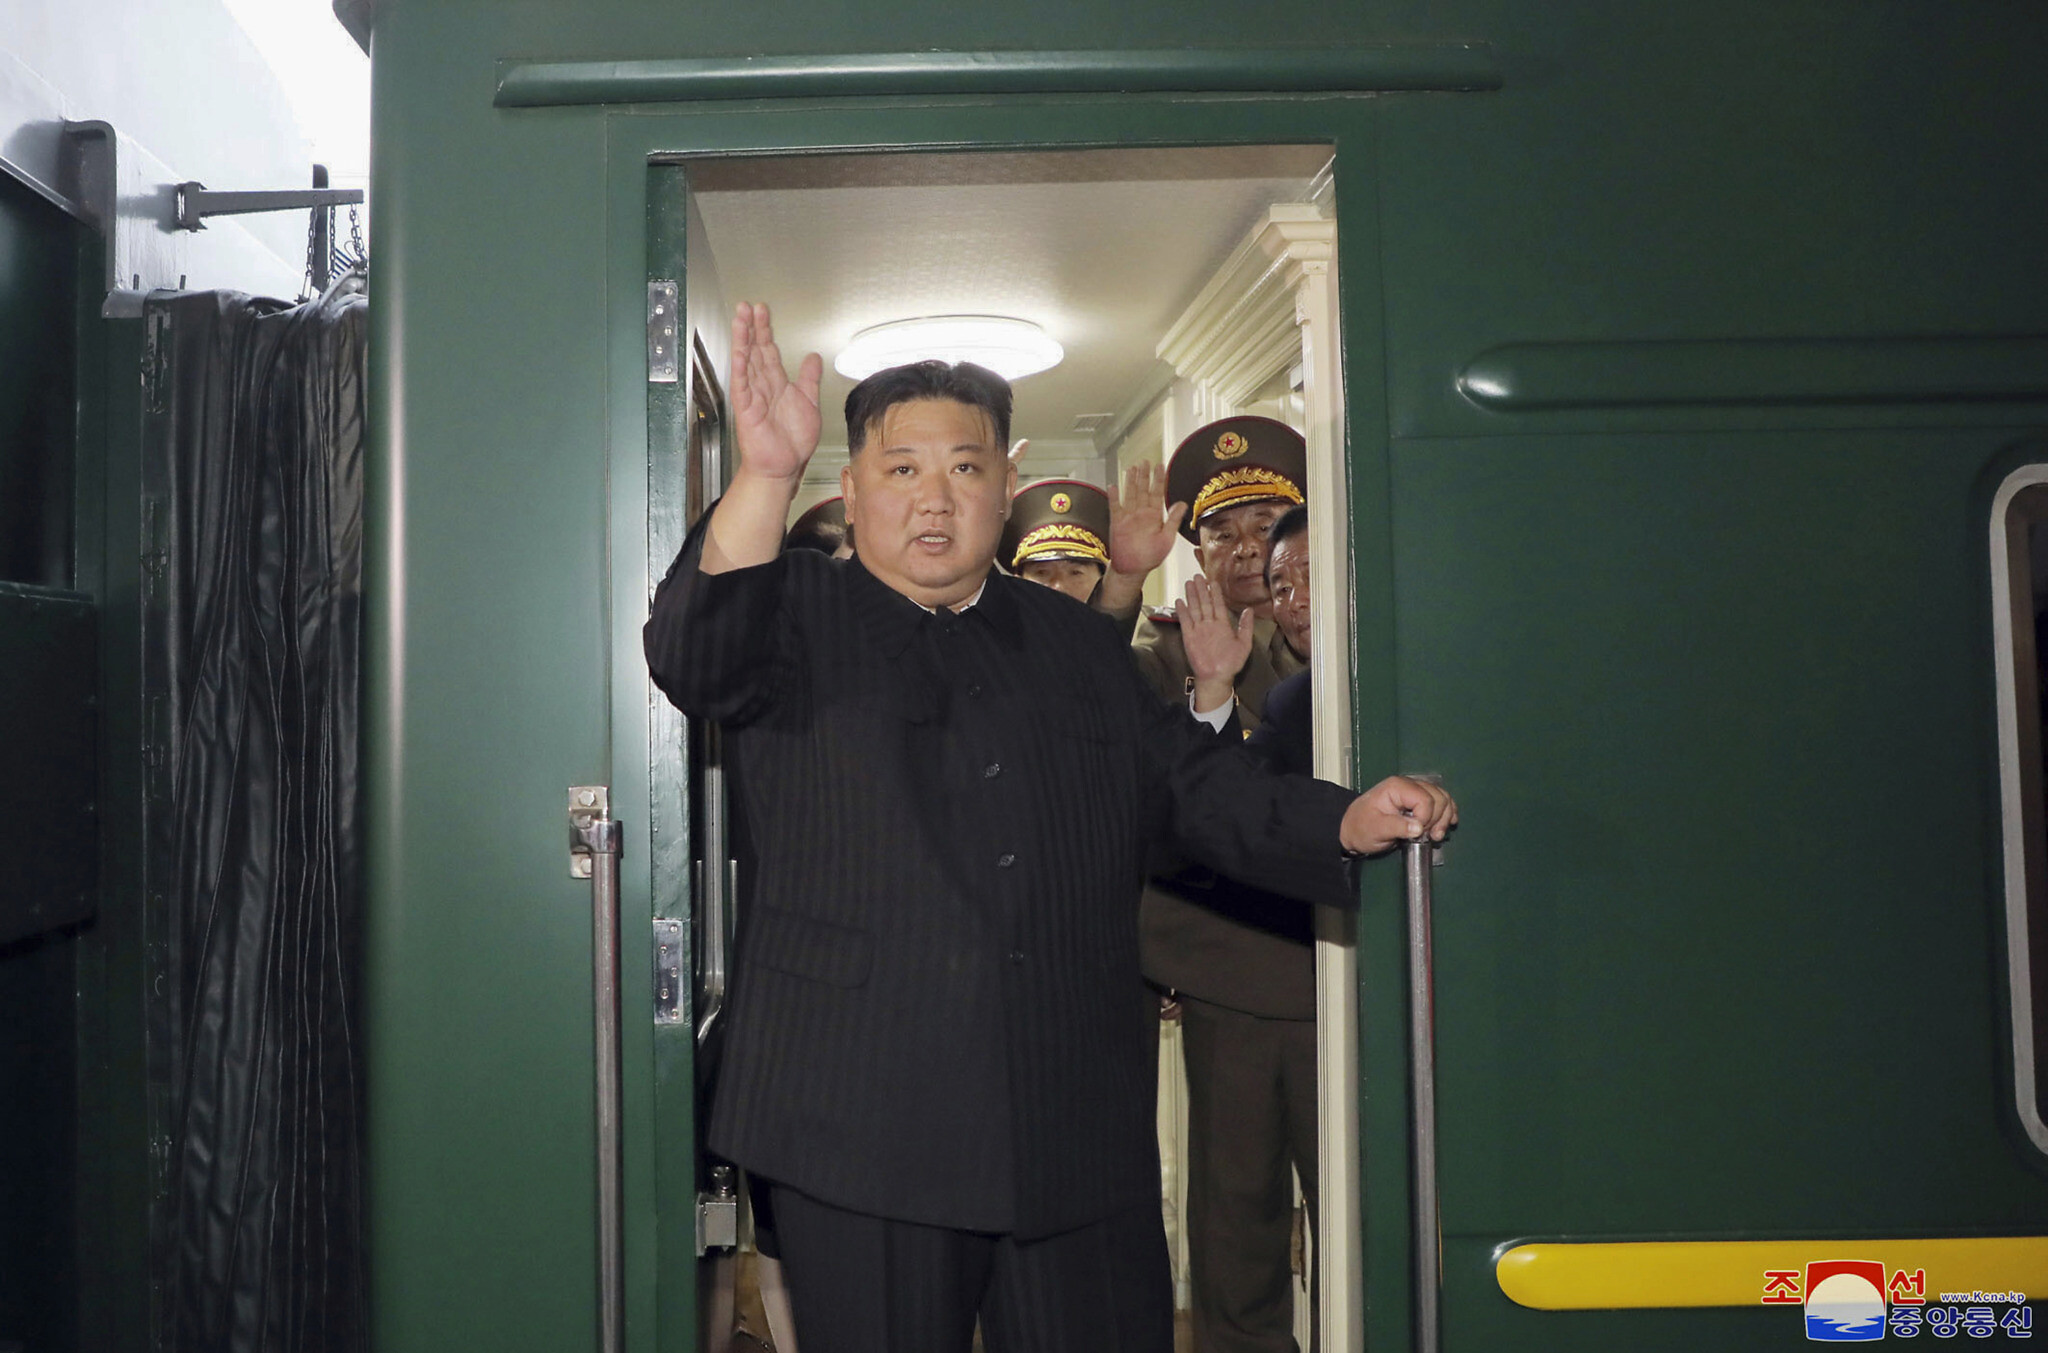 Kim Jong Un arrives in Russia via train ahead of meeting with Putin | The Times of Israel